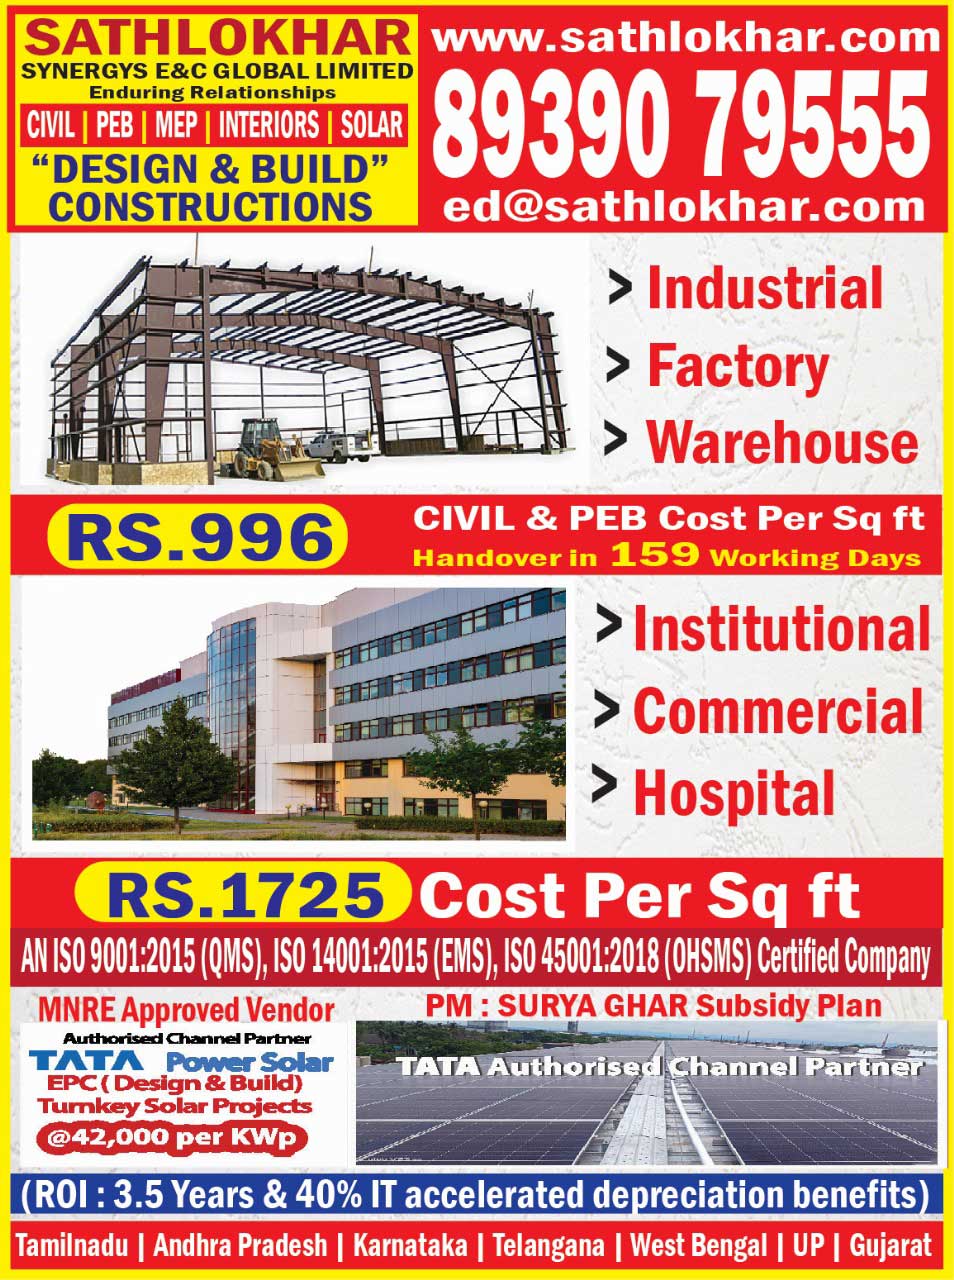 Industrial Building & Construction Companies in Chennai, India